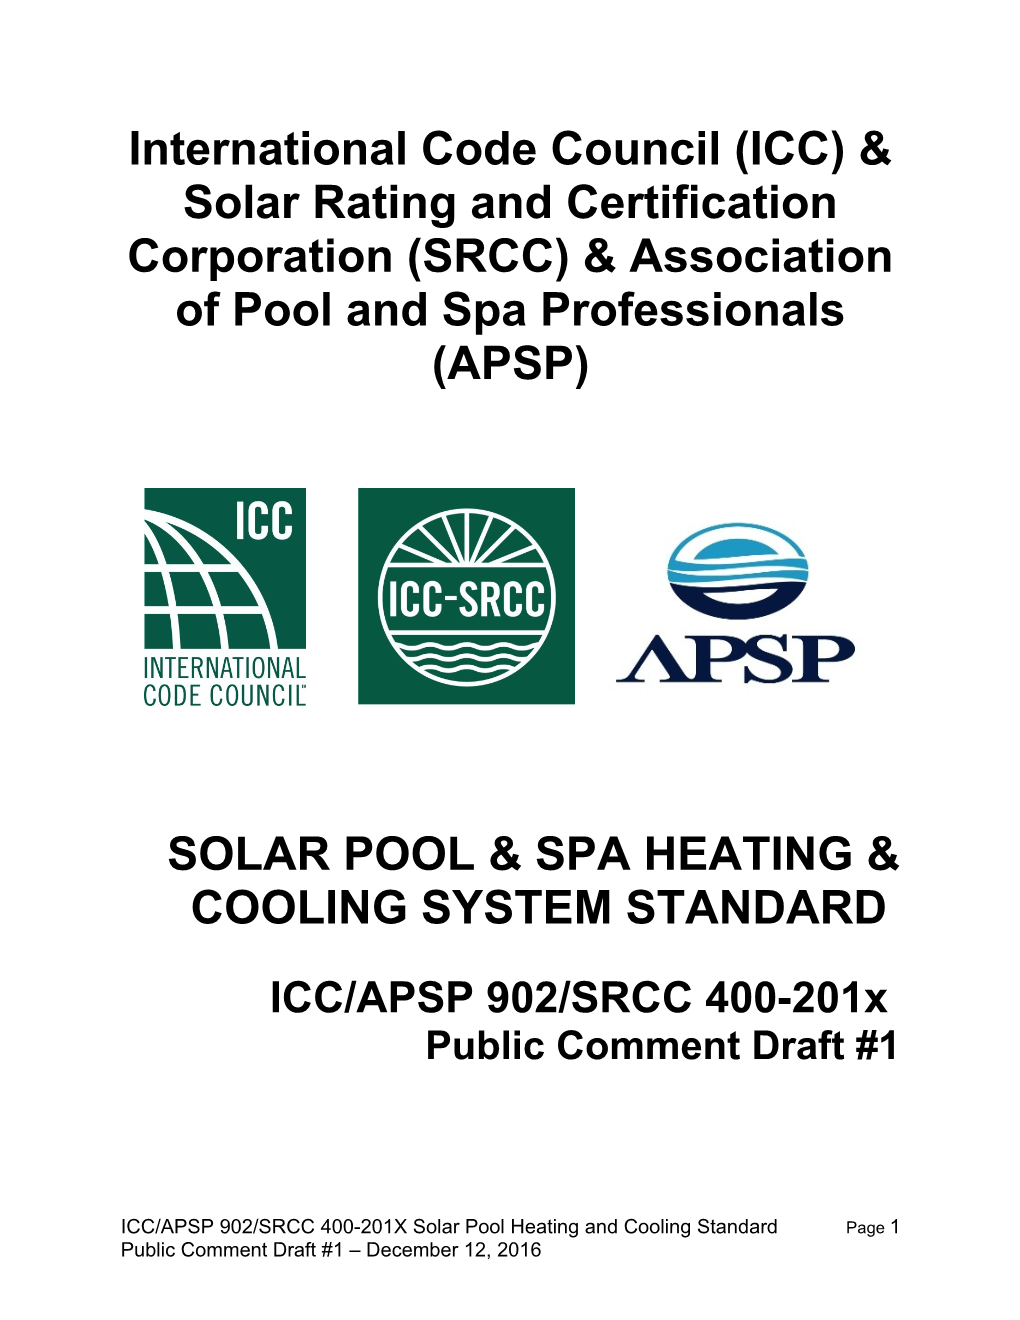 Solar Pool & Spa Heating & Cooling System Standard